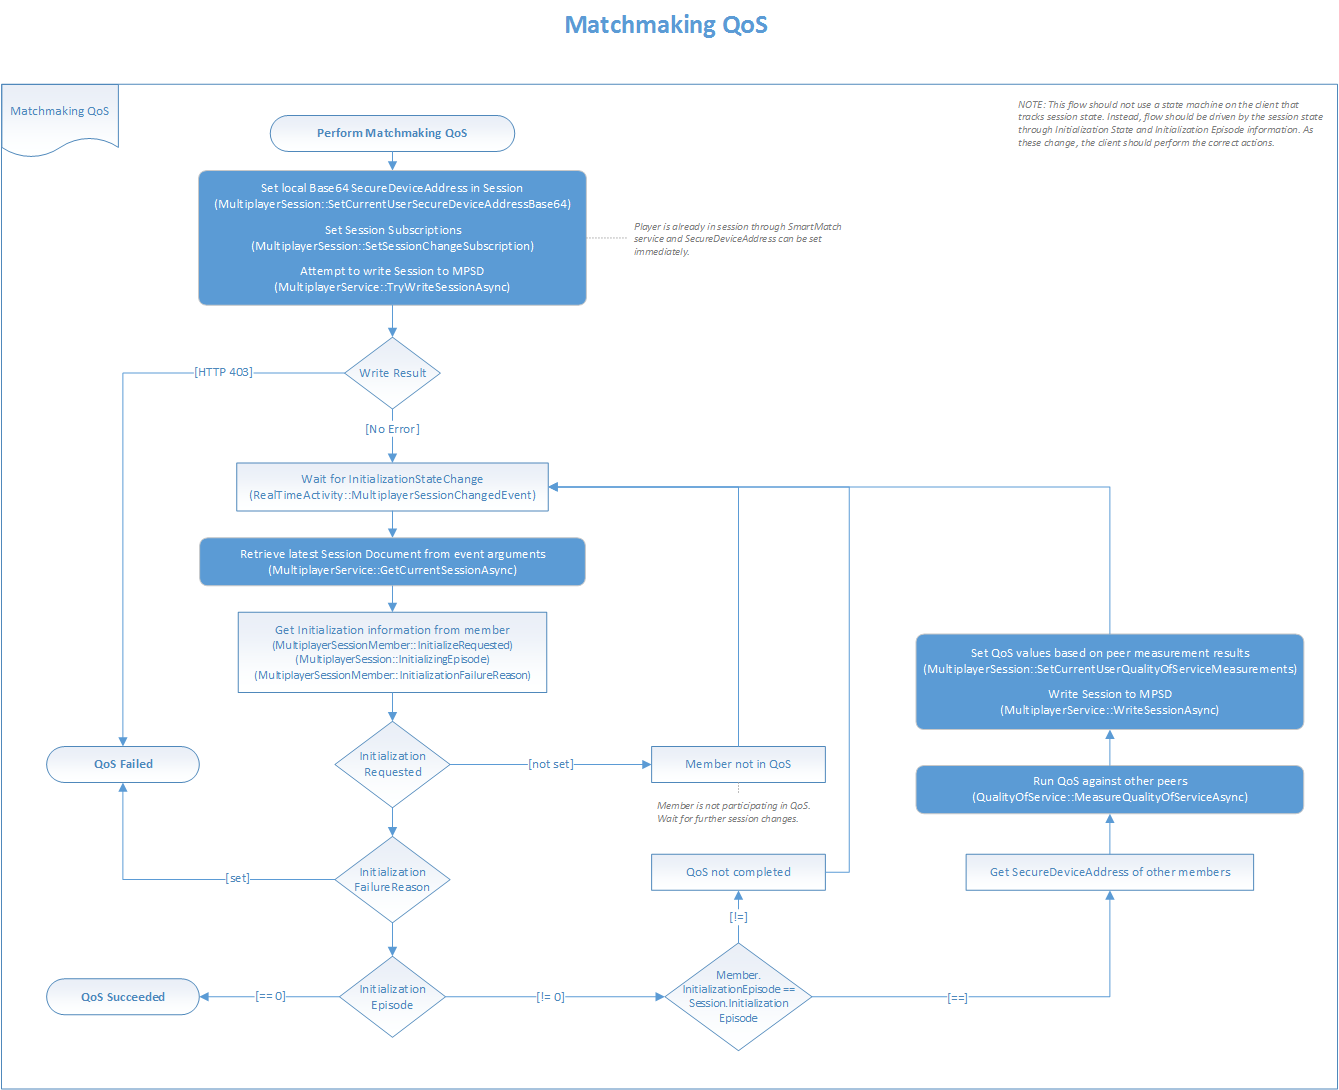 Image of a matchmaking QoS flowchart that illustrates how to implement the initialization of the target session and QoS operations